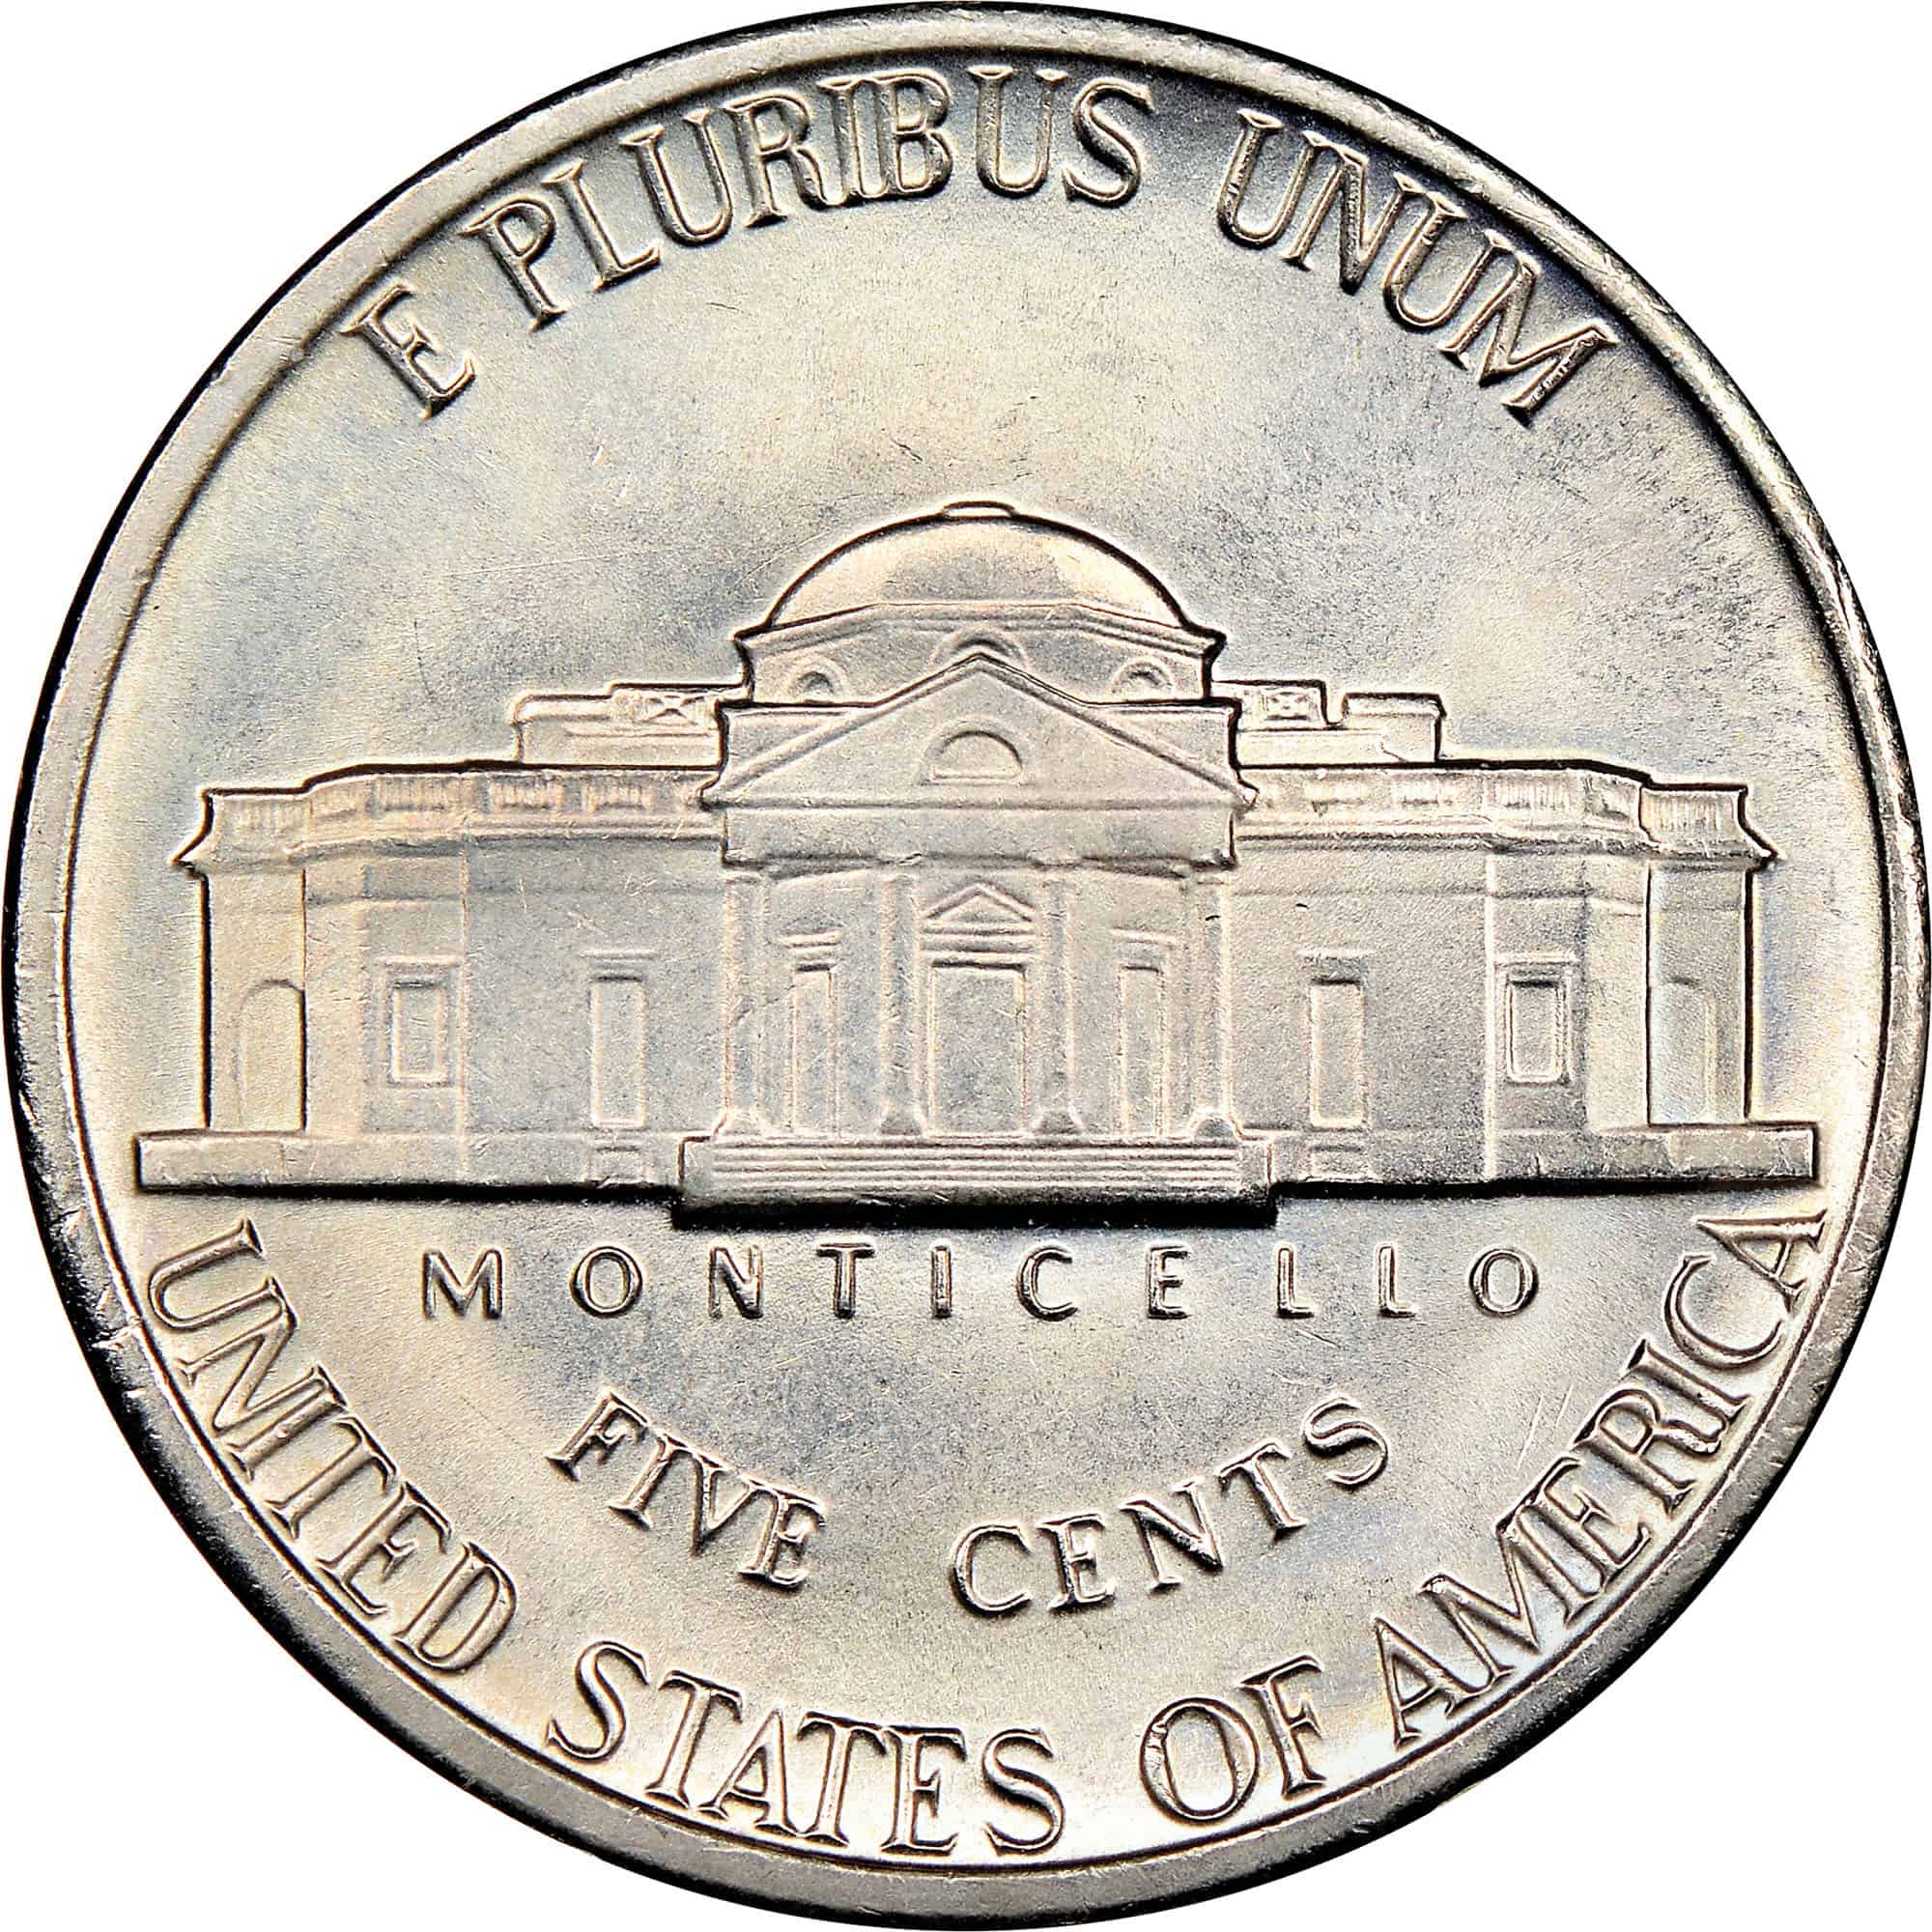 The reverse of the 1979 Jefferson nickel